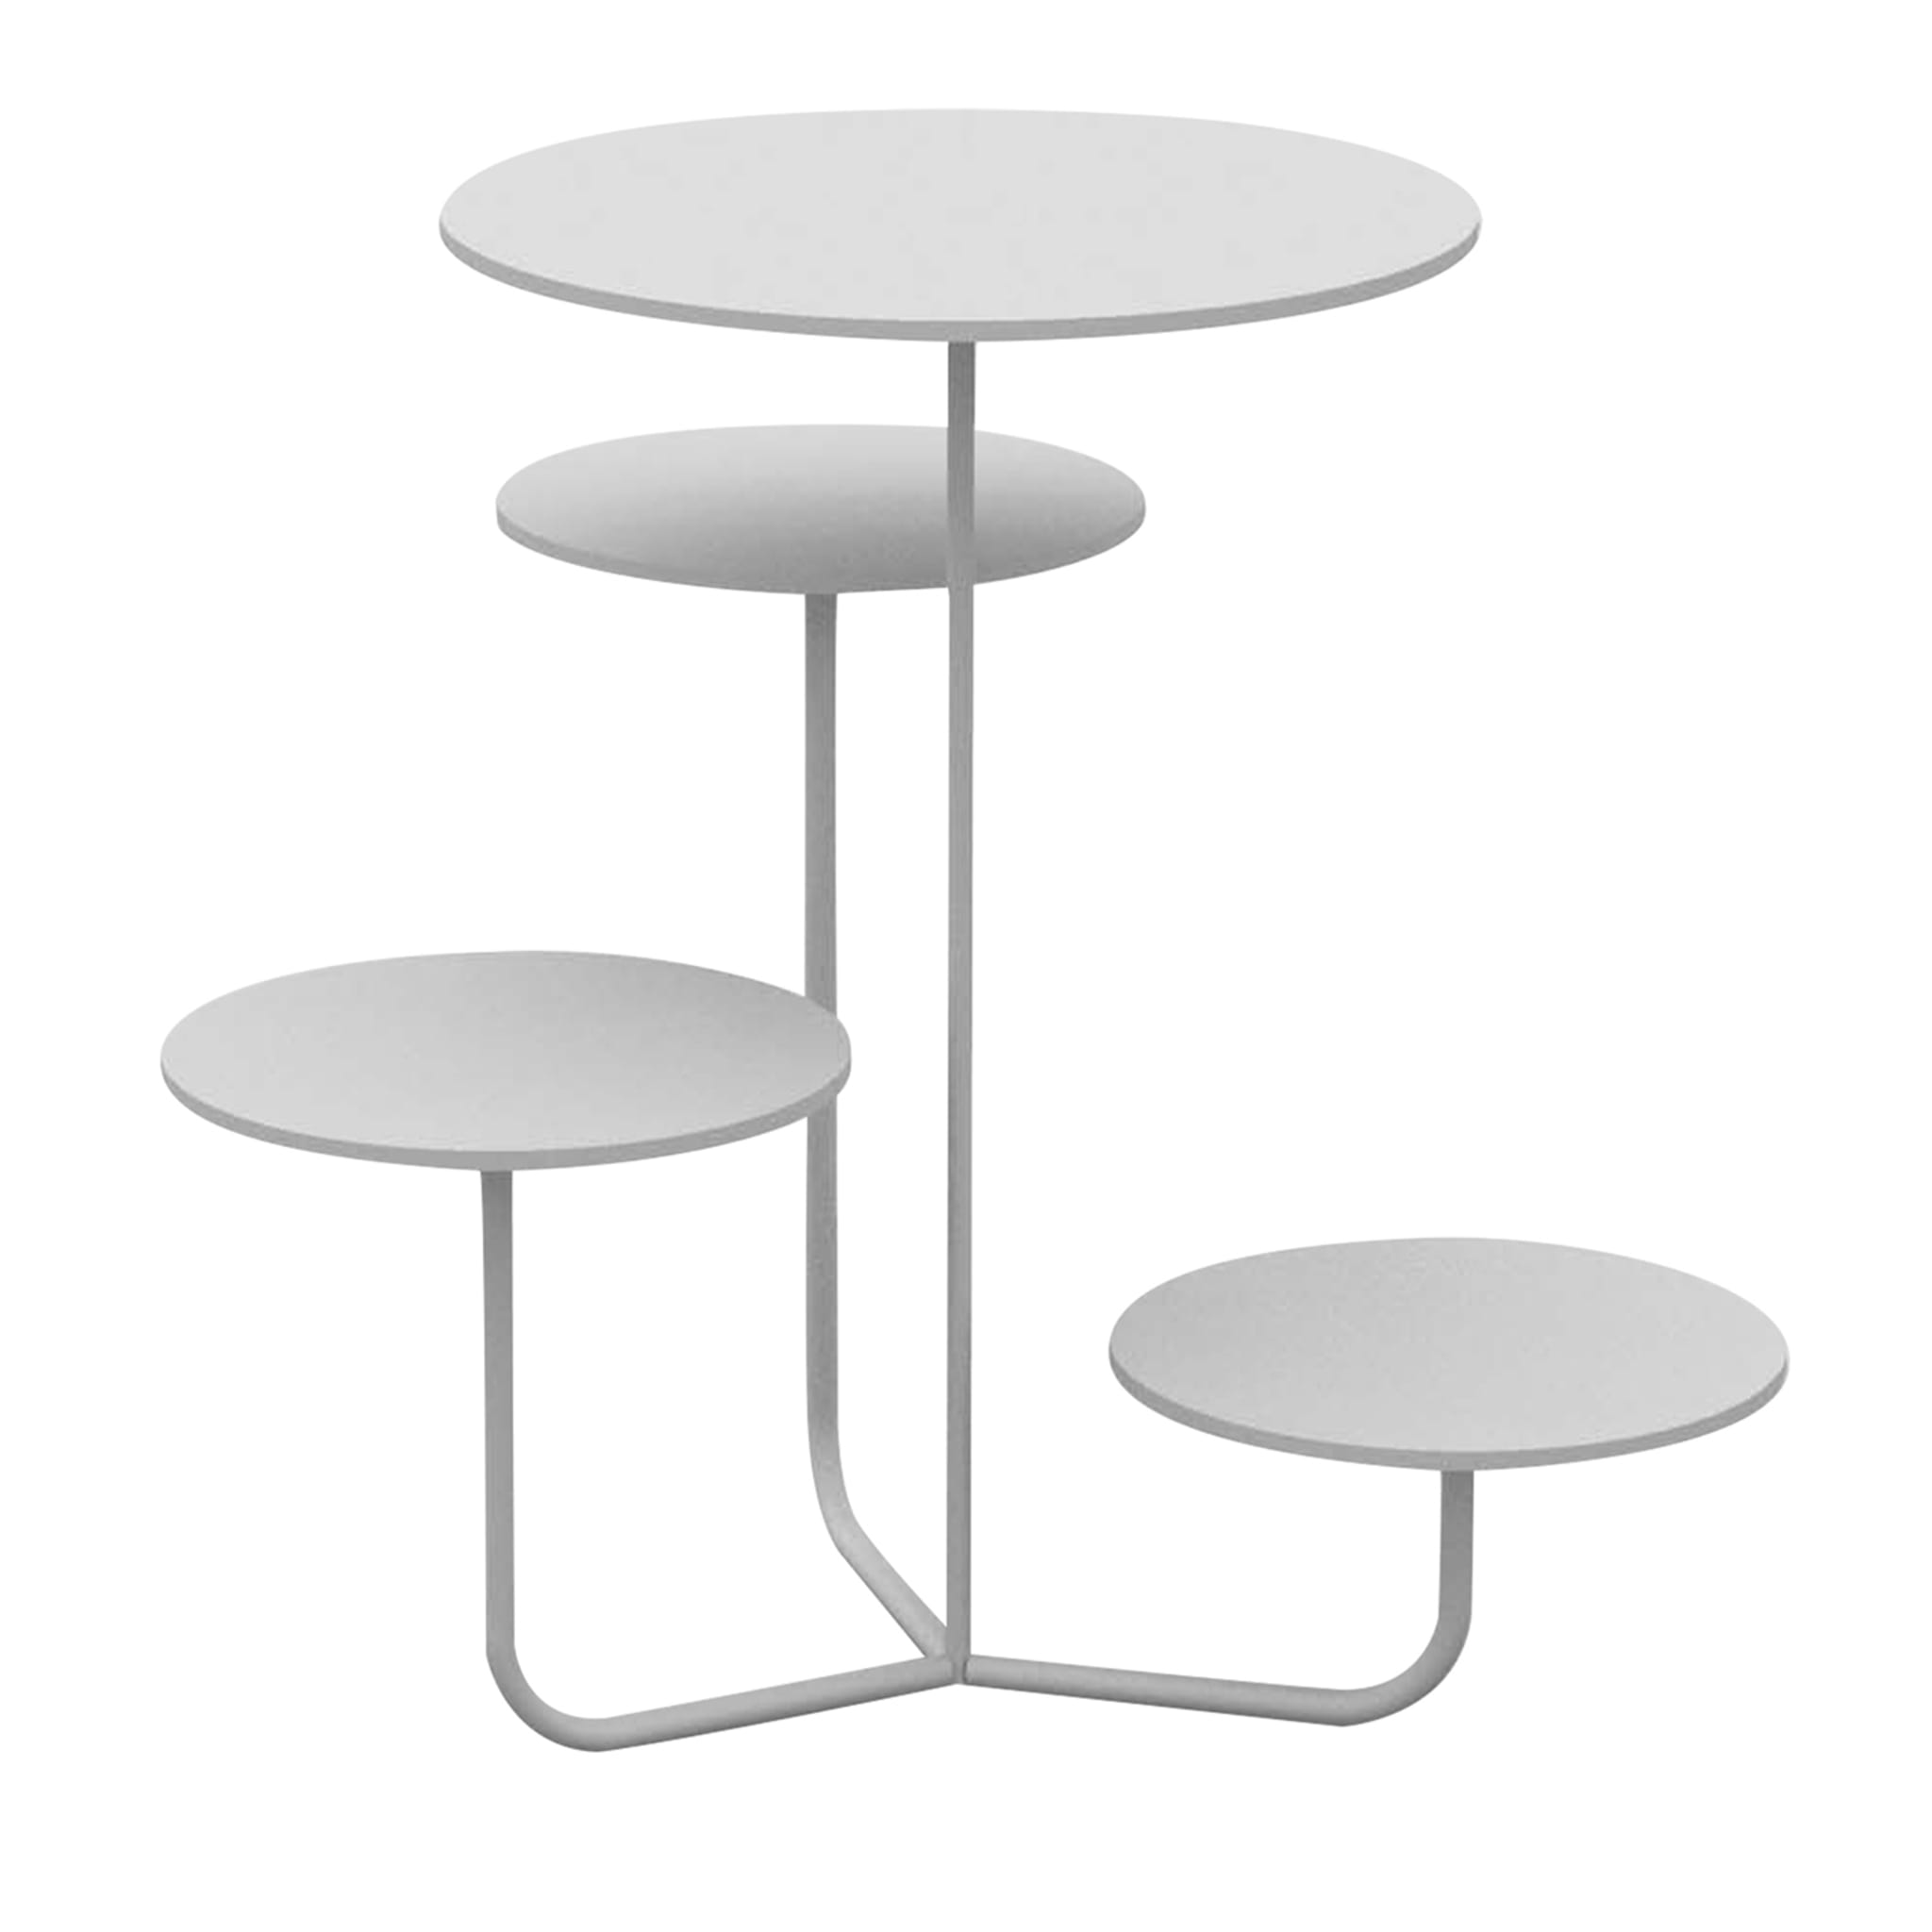 Condiviso 4-Tier White Serving Stand - Main view